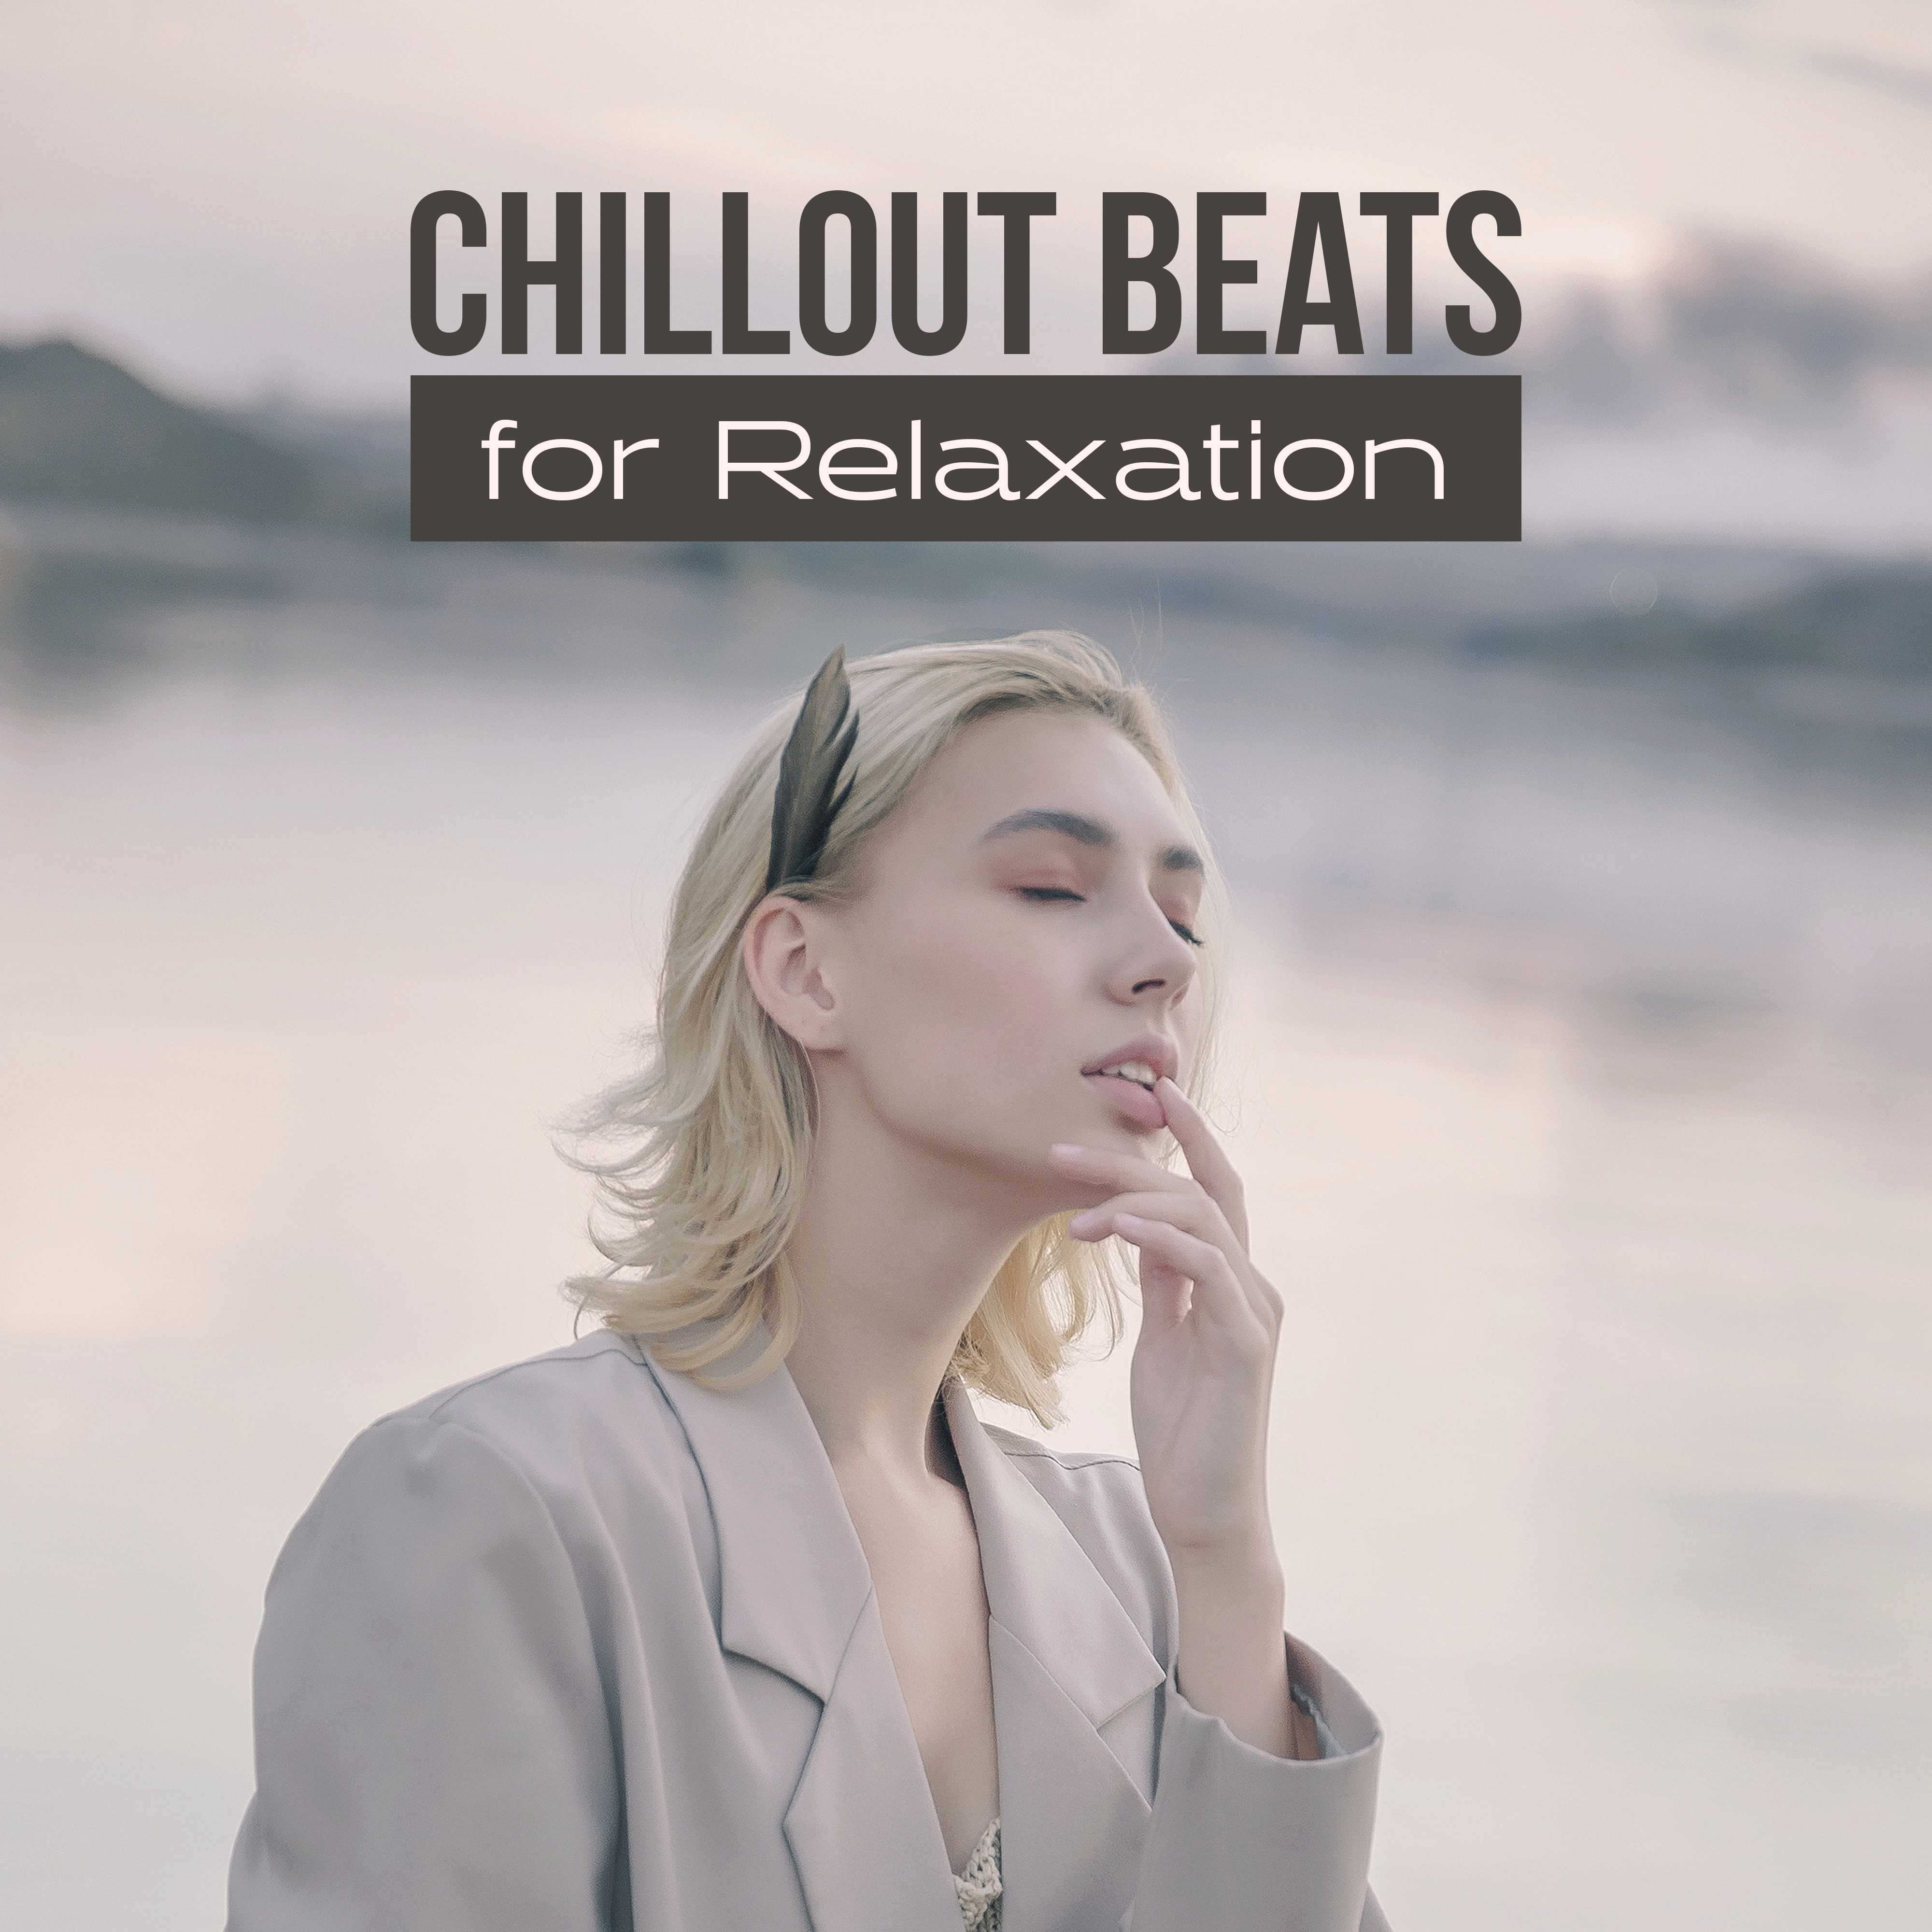 Chillout Beats for Relaxation